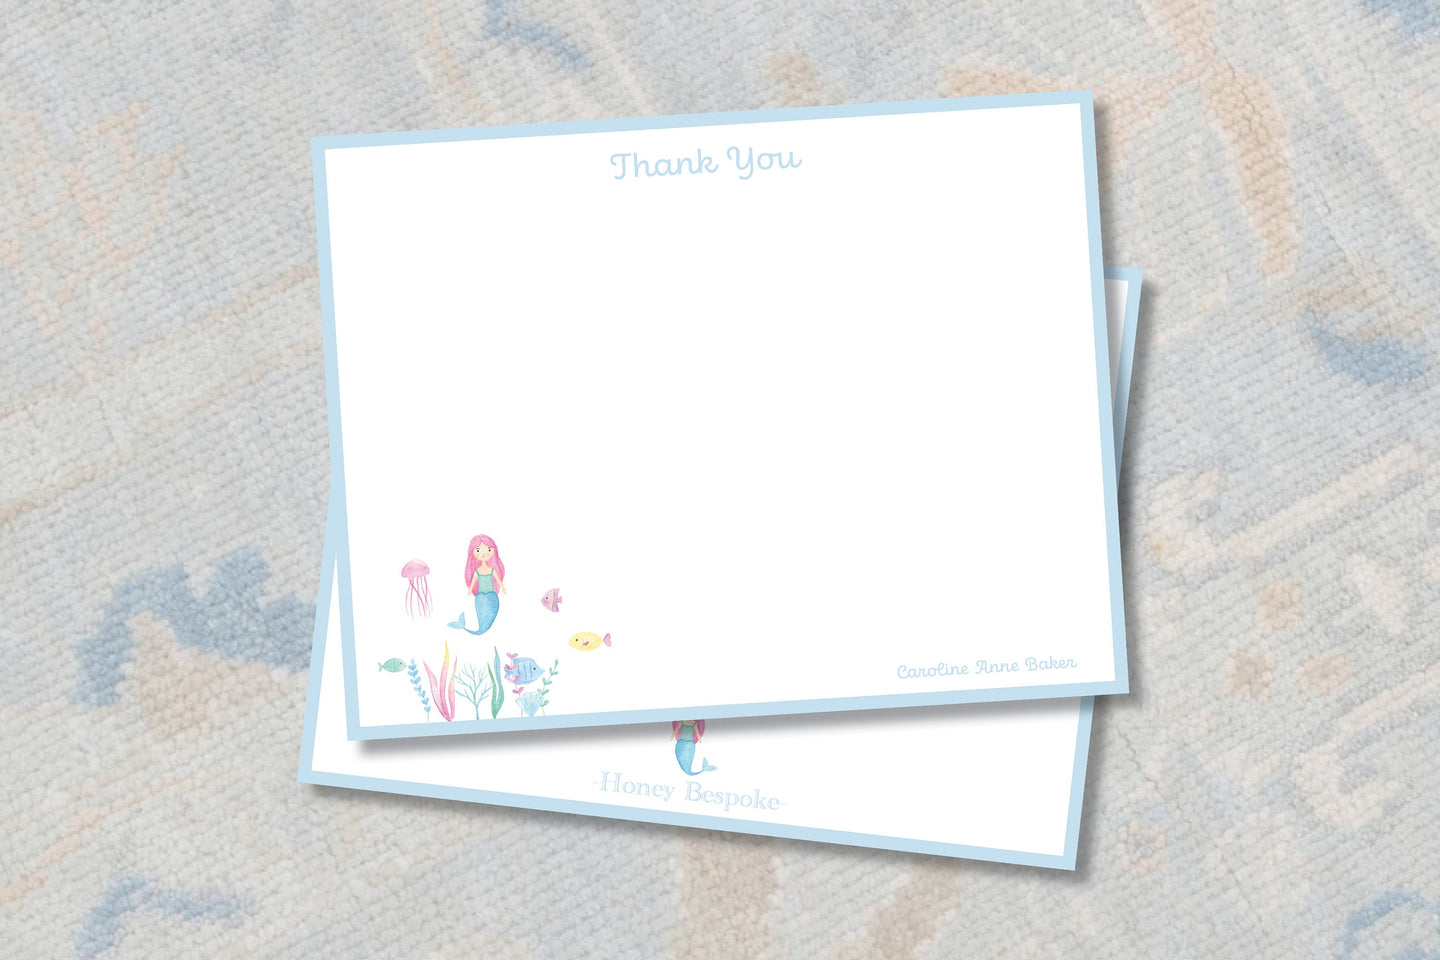 Personalized Watercolor Stationery / Girls Stationery Set / Mermaid / Personalized Thank You Cards / Preppy Stationery / Thank you Notes